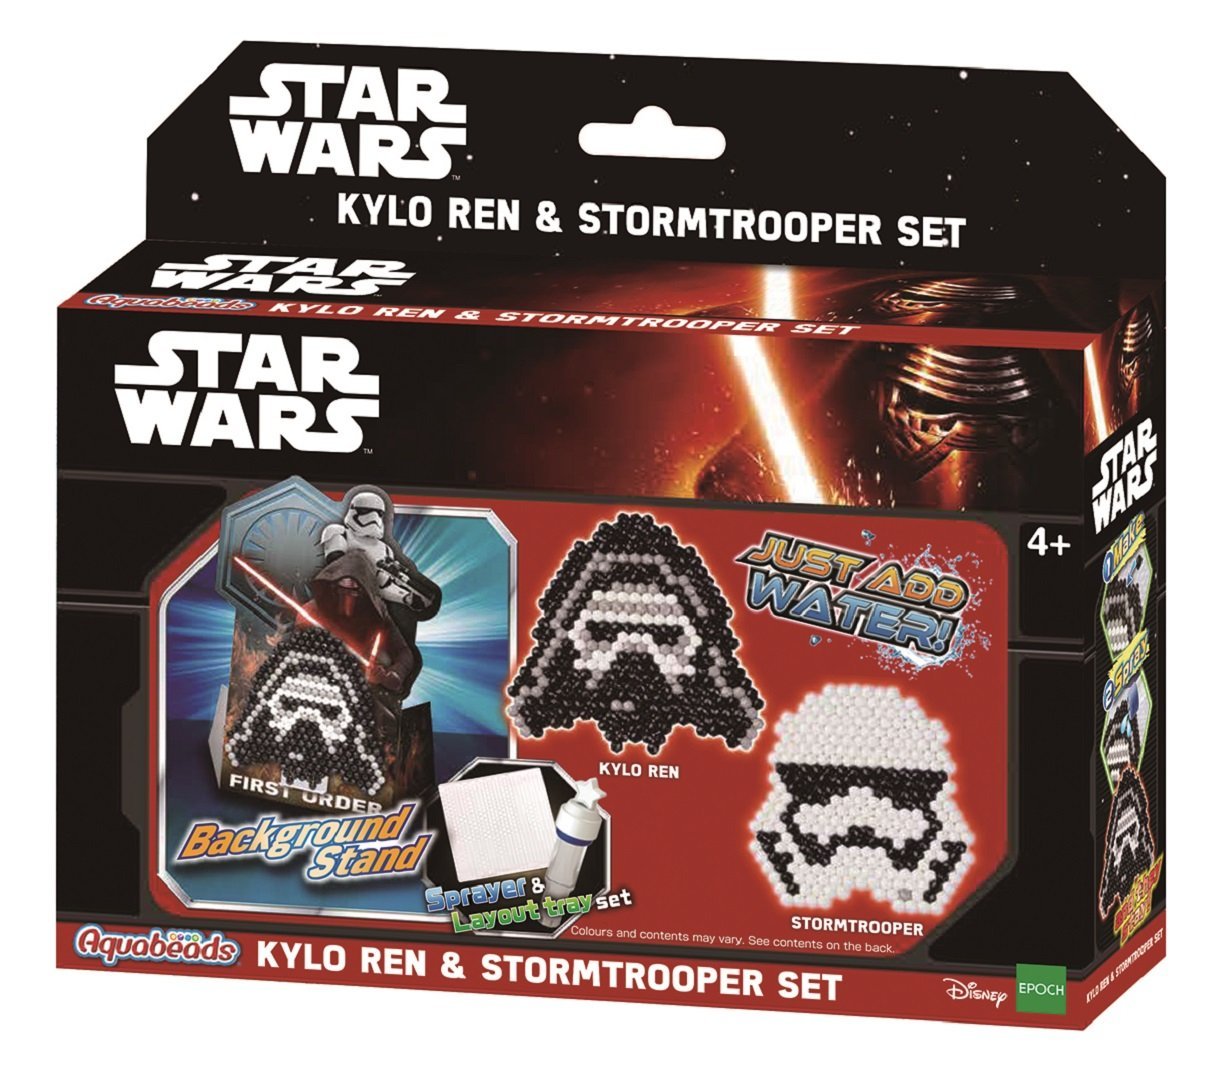 Going To The Dark Side With The Aquabeads Star Wars Kylo Ren & Stormtrooper Set